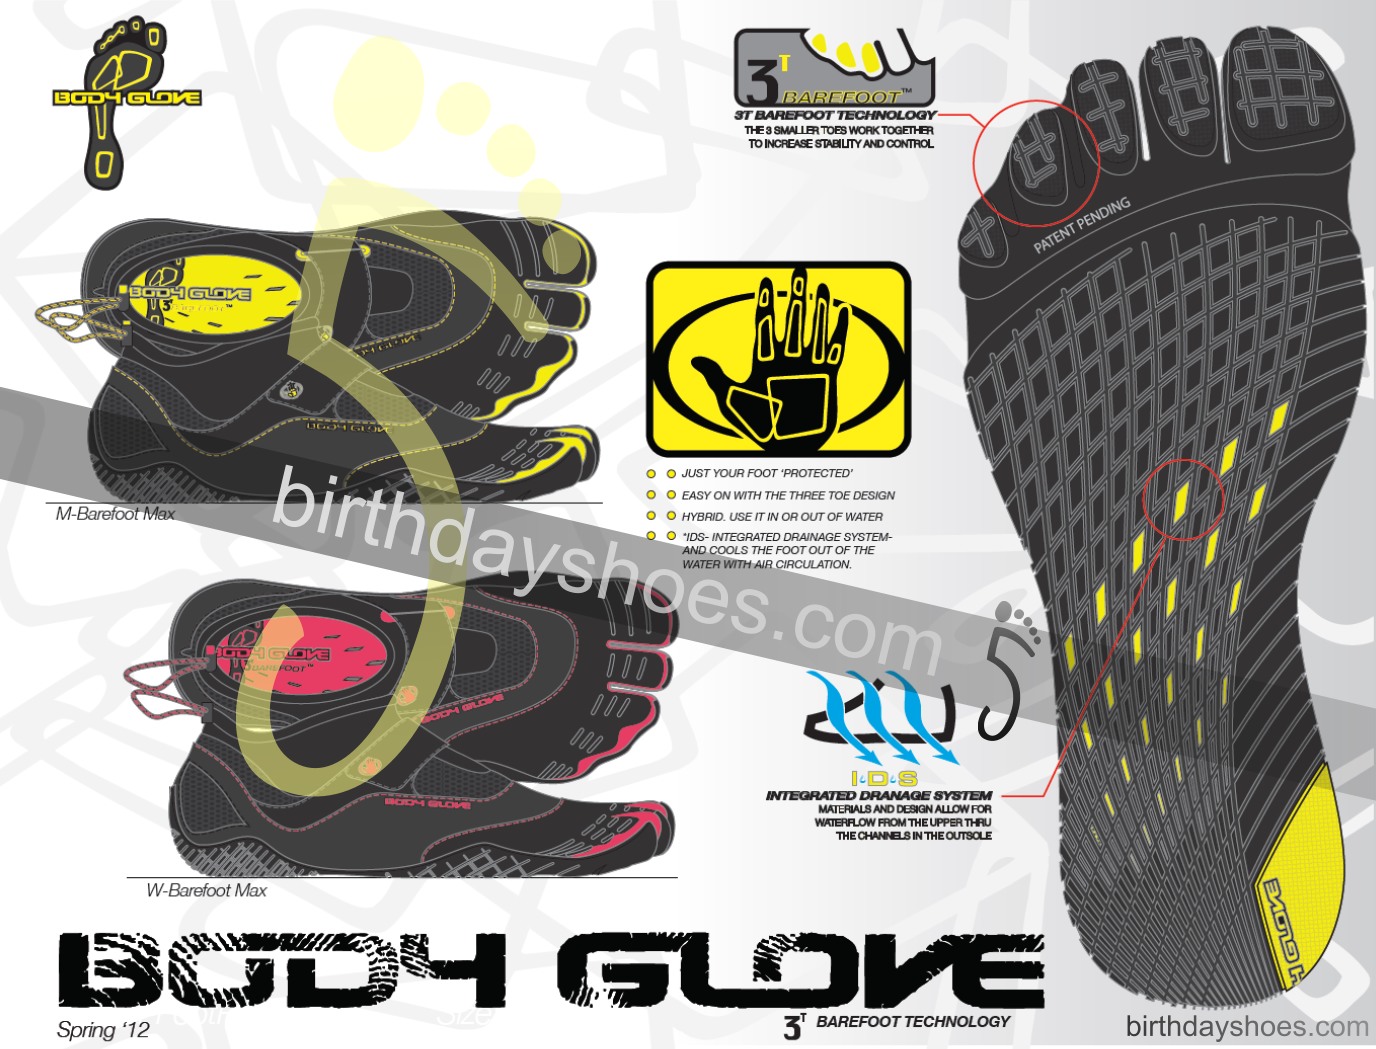 Coming in Spring 2012 is this three-toed shoe from Body Glove - the Body Glove 3T.